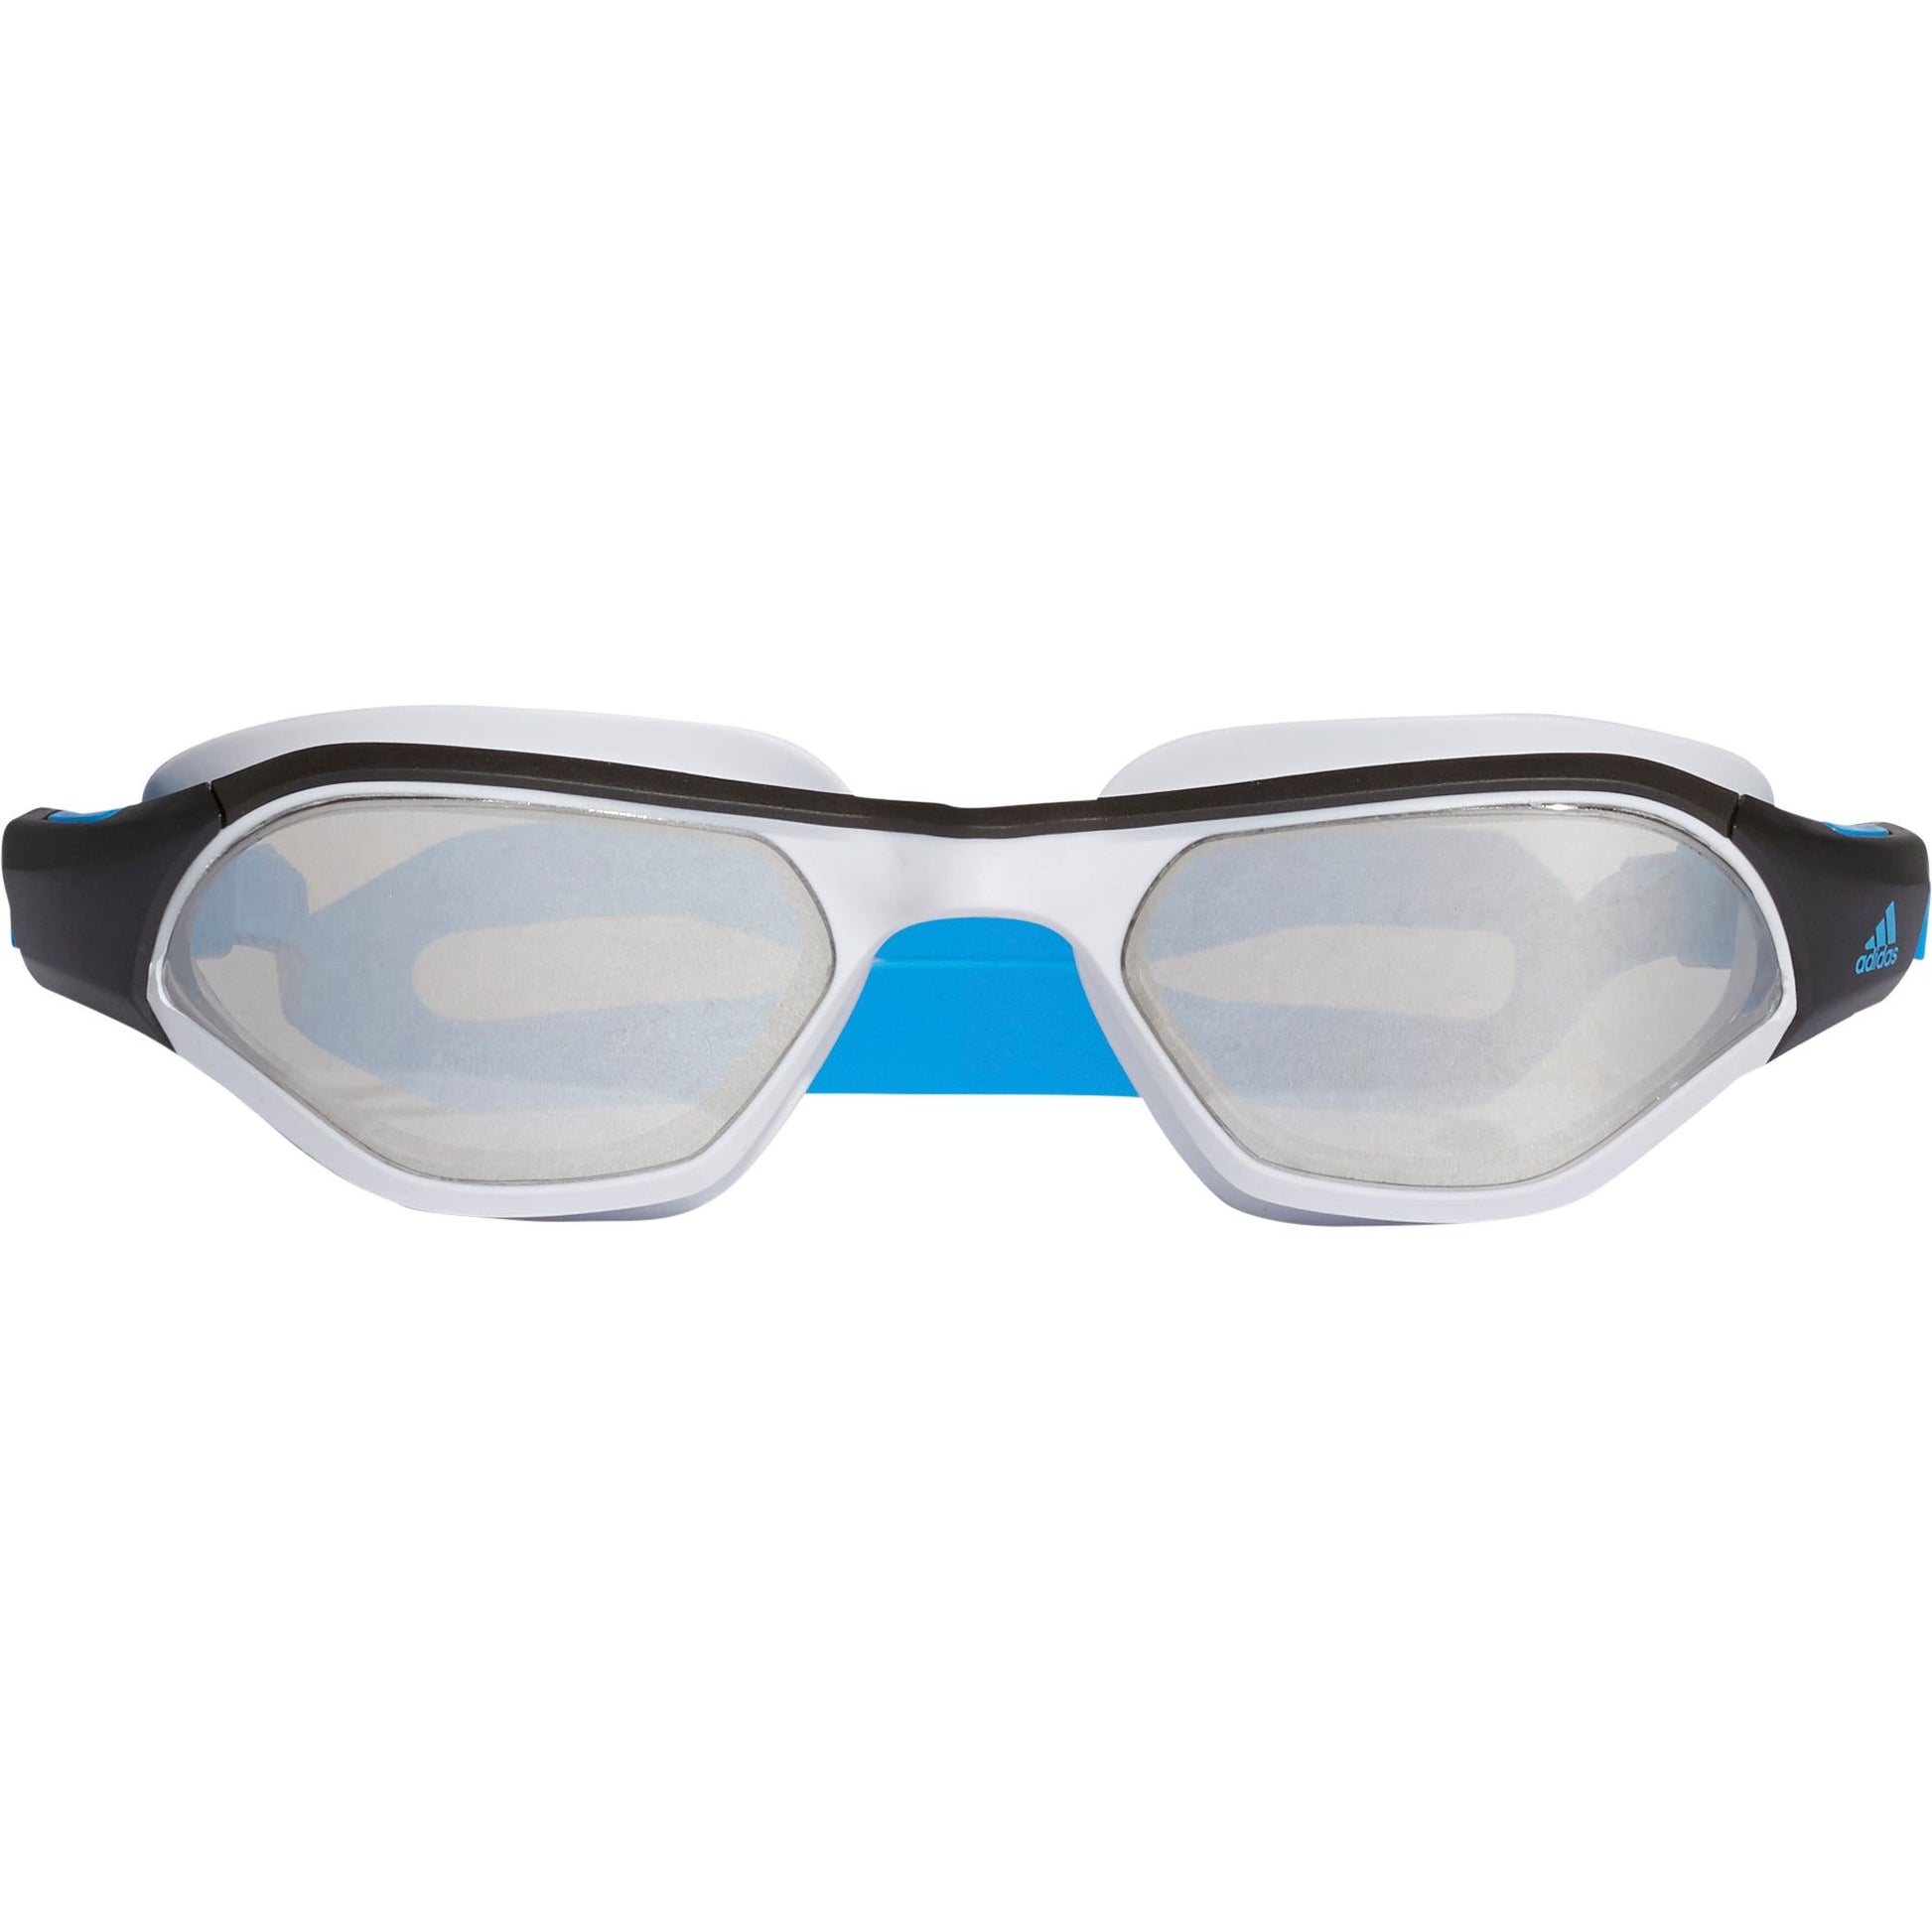 Adidas Persistar Mirrored Swimming Goggles Br5791 Front - Front View